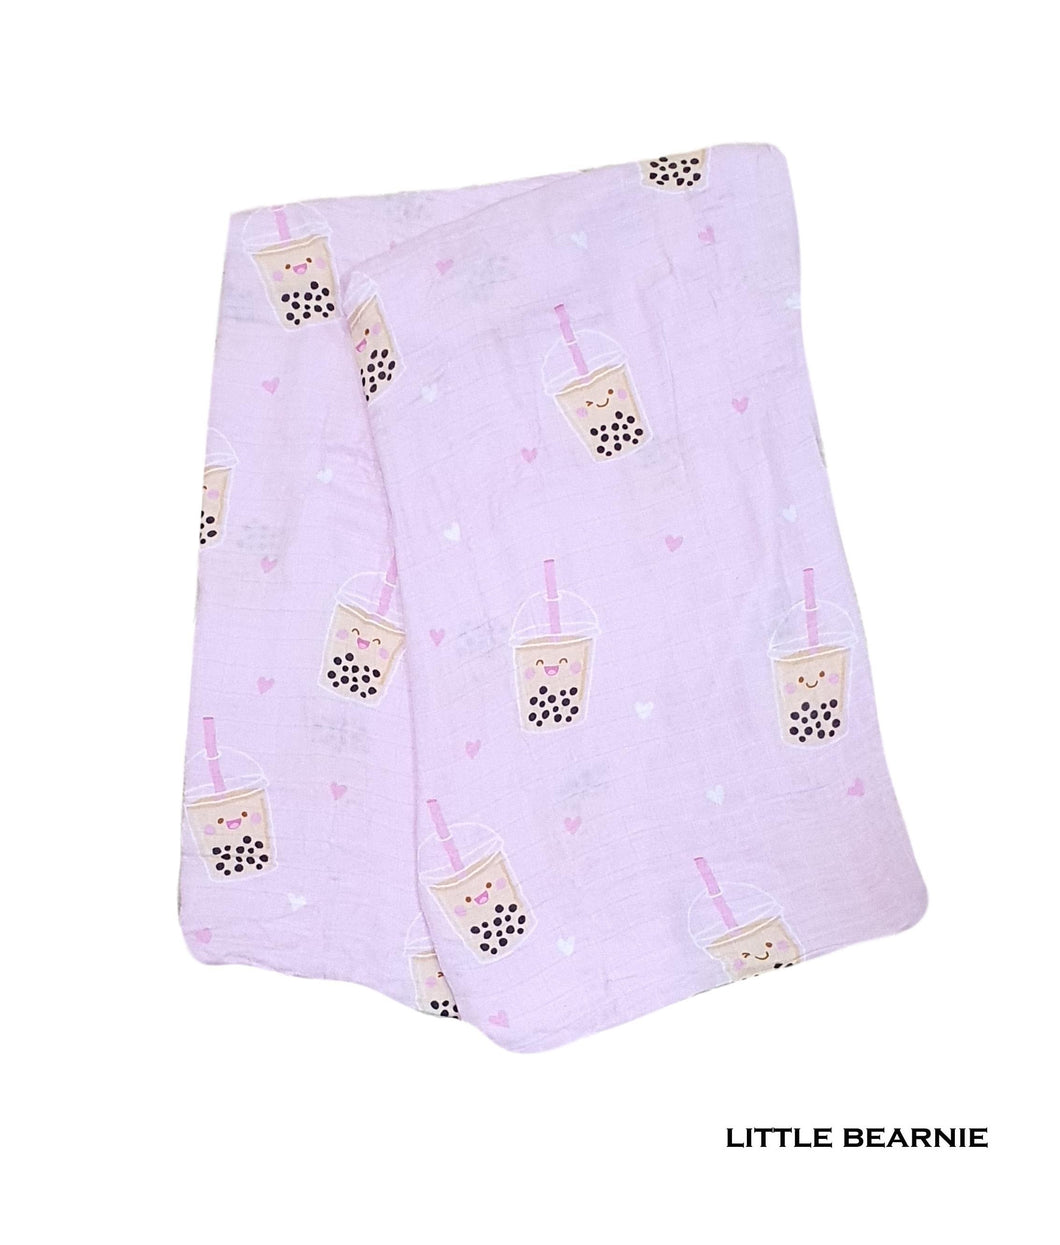 Little Bearnie Swaddle - Boba (Pink)